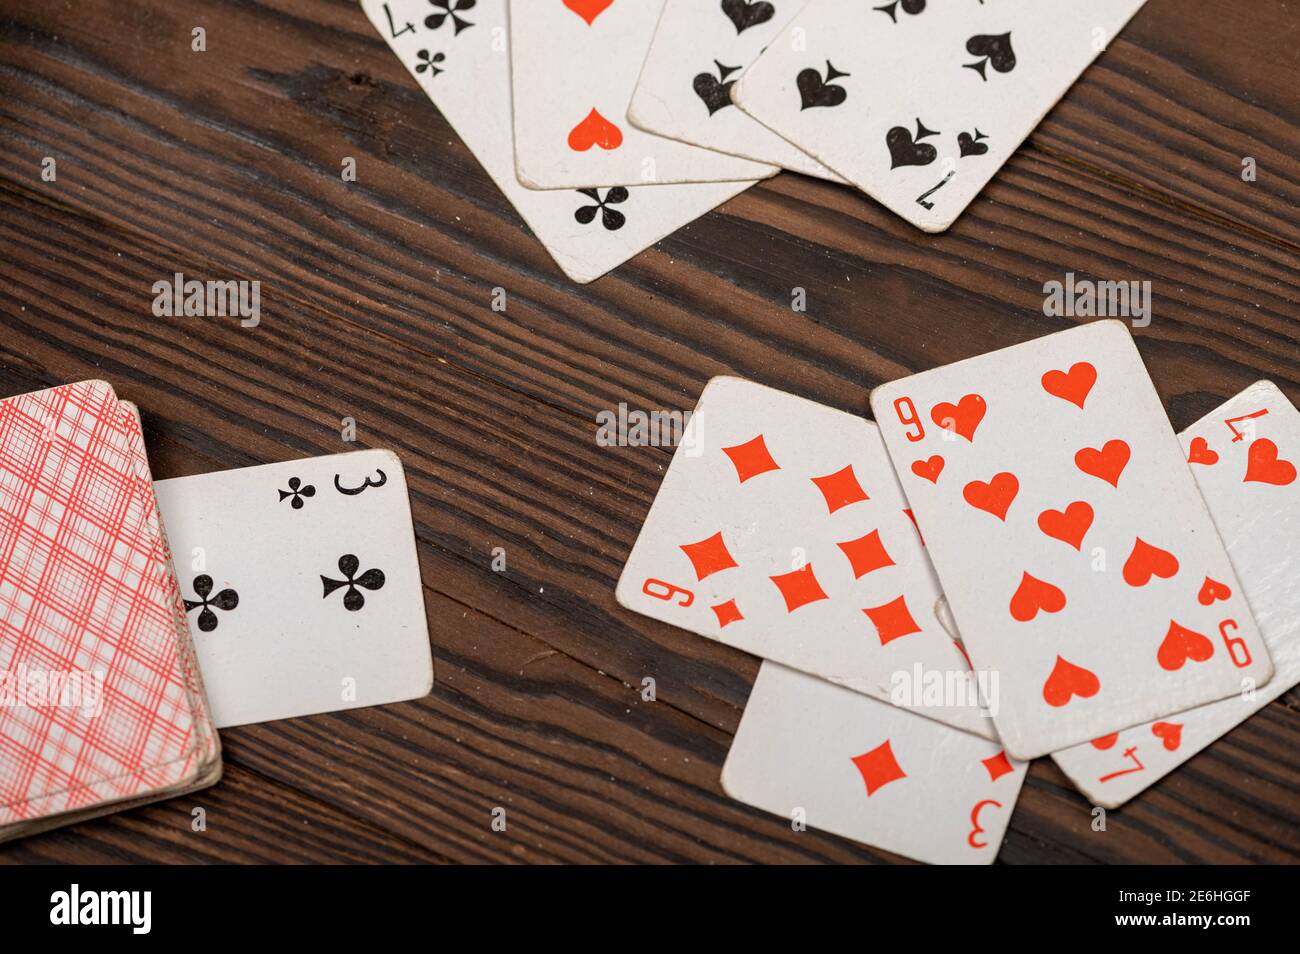 Playing cards on a wooden table. Close-up, selective focus. Stock Photo